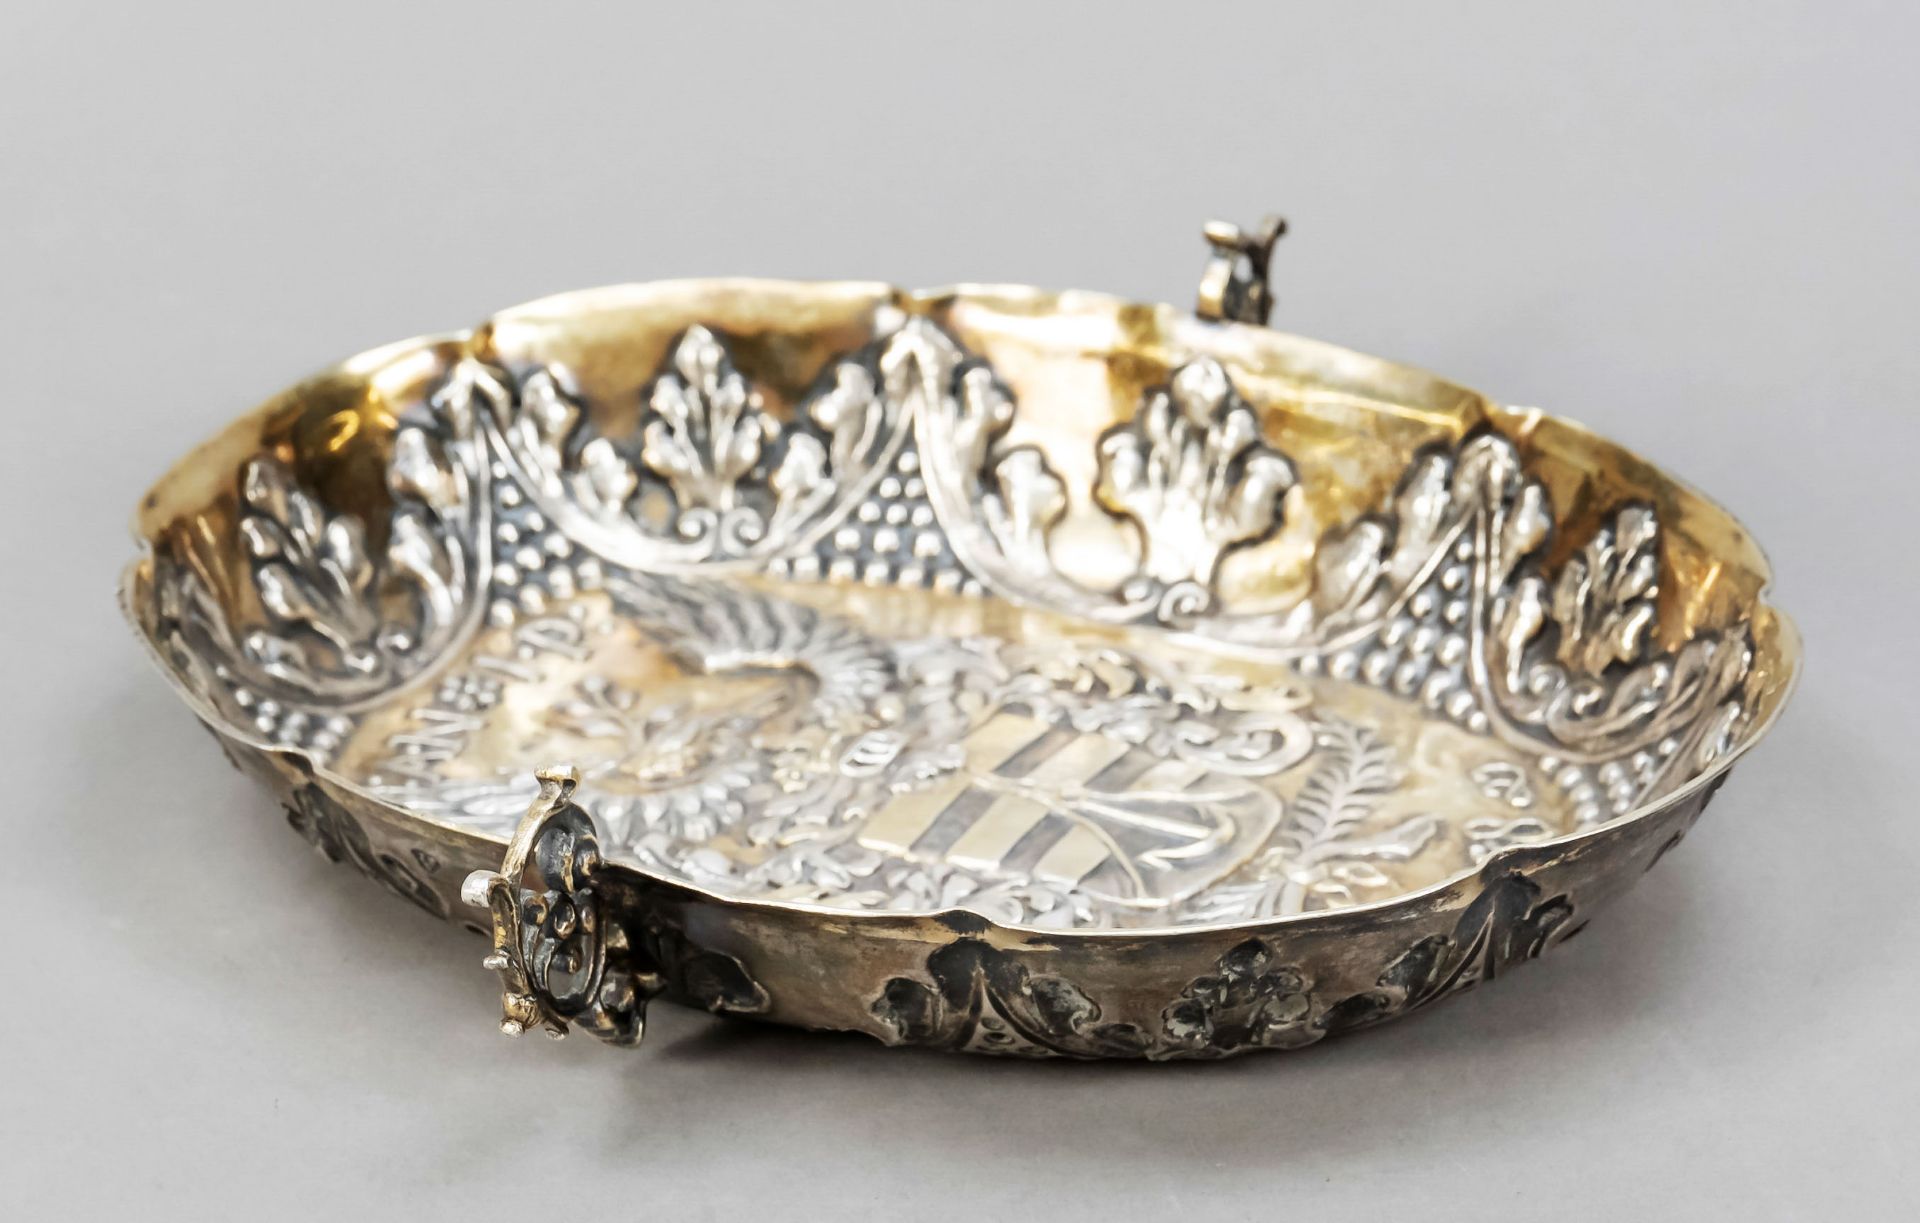 Oval bowl, late 17th century, silver hallmarked, partly gilded, of curved form, the sides with - Image 2 of 2